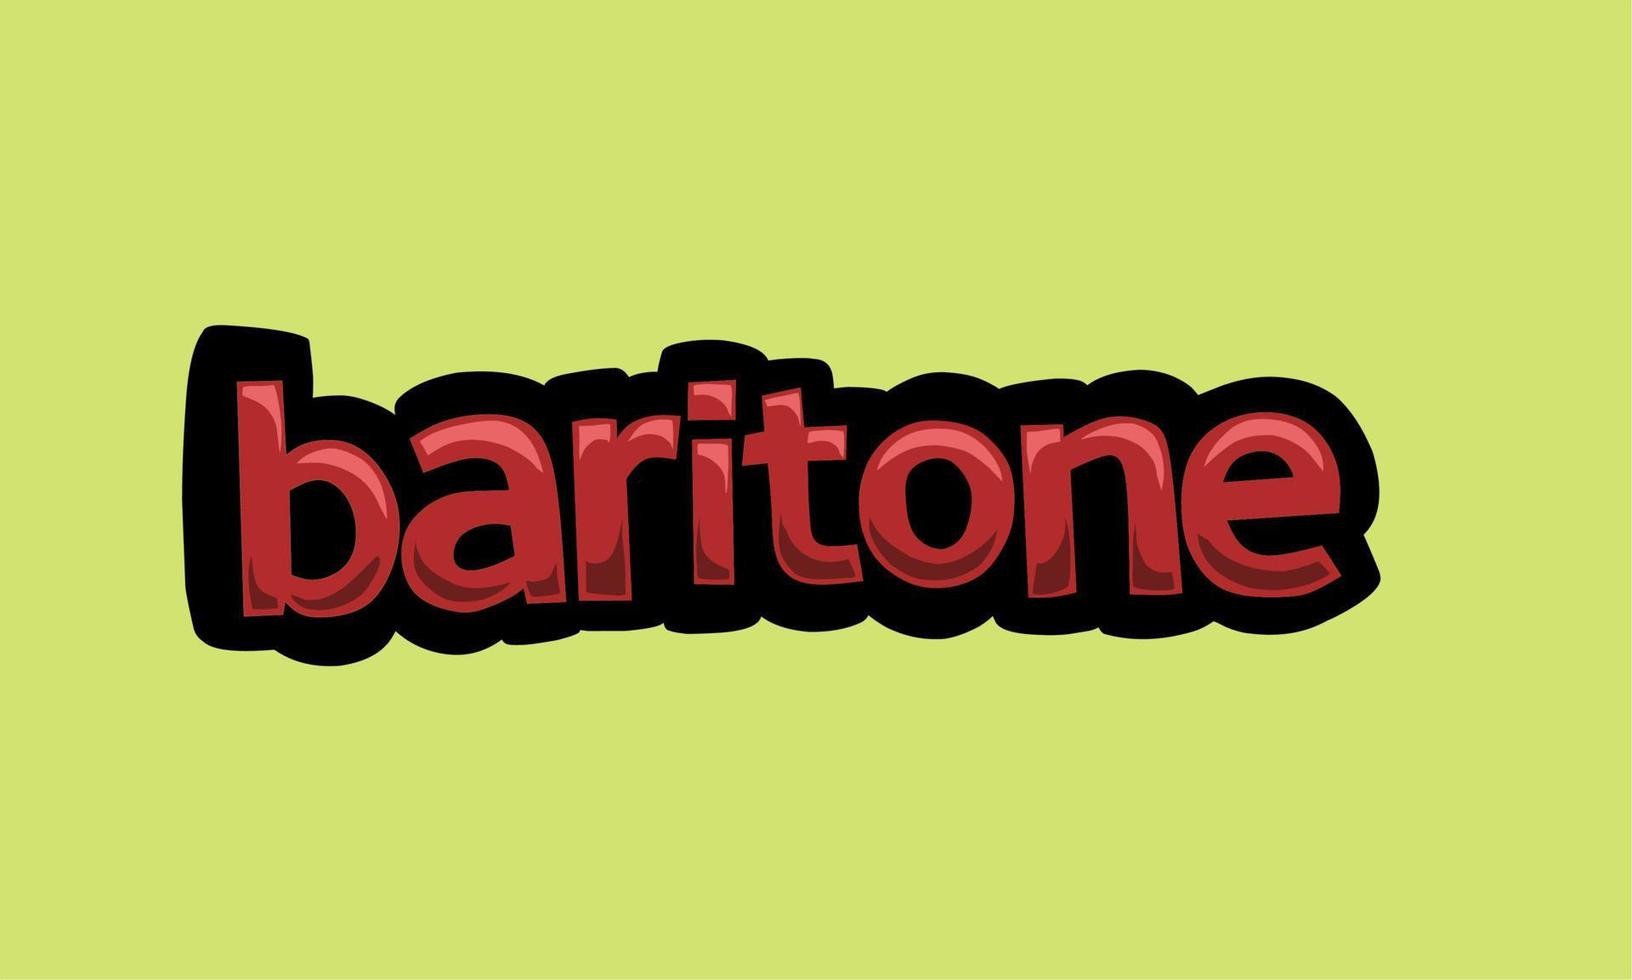 baritone writing vector design on a green background